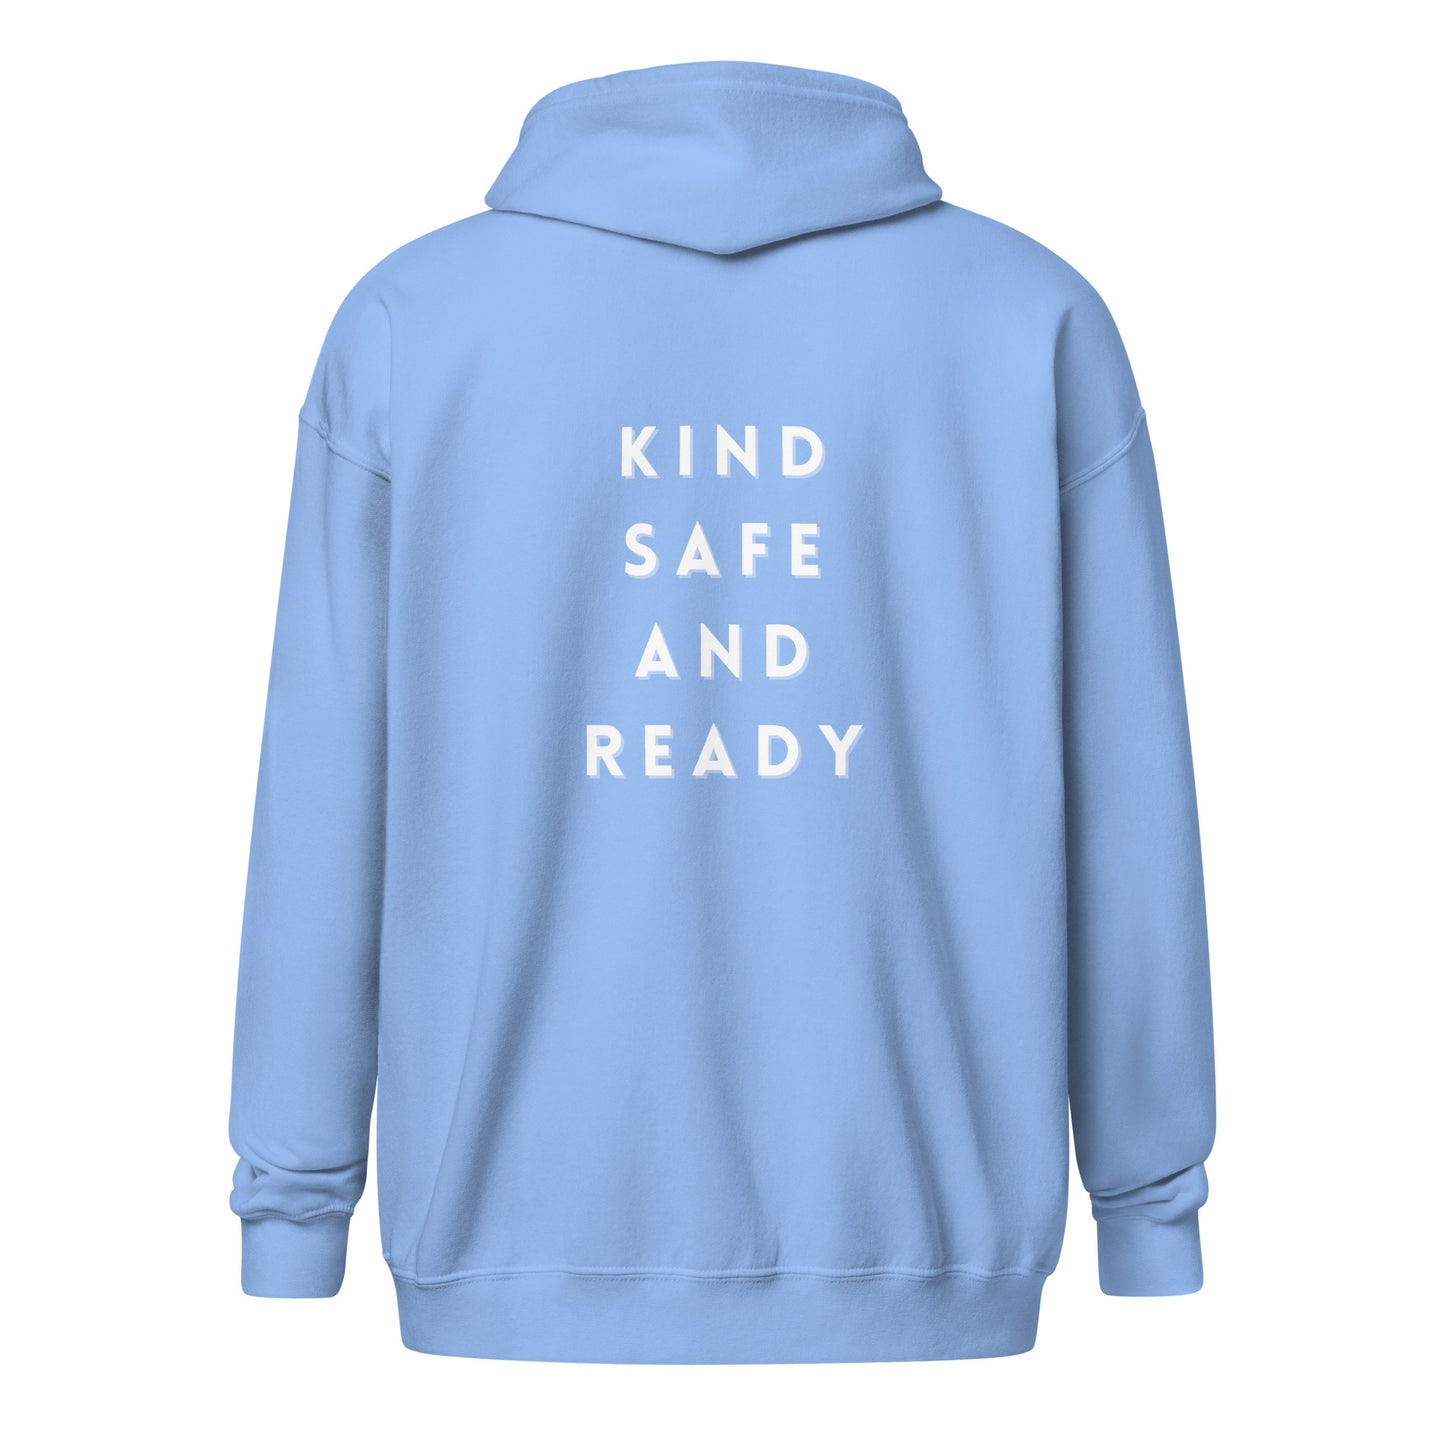 Kind, Safe, and Ready- Unisex heavy blend zip hoodie